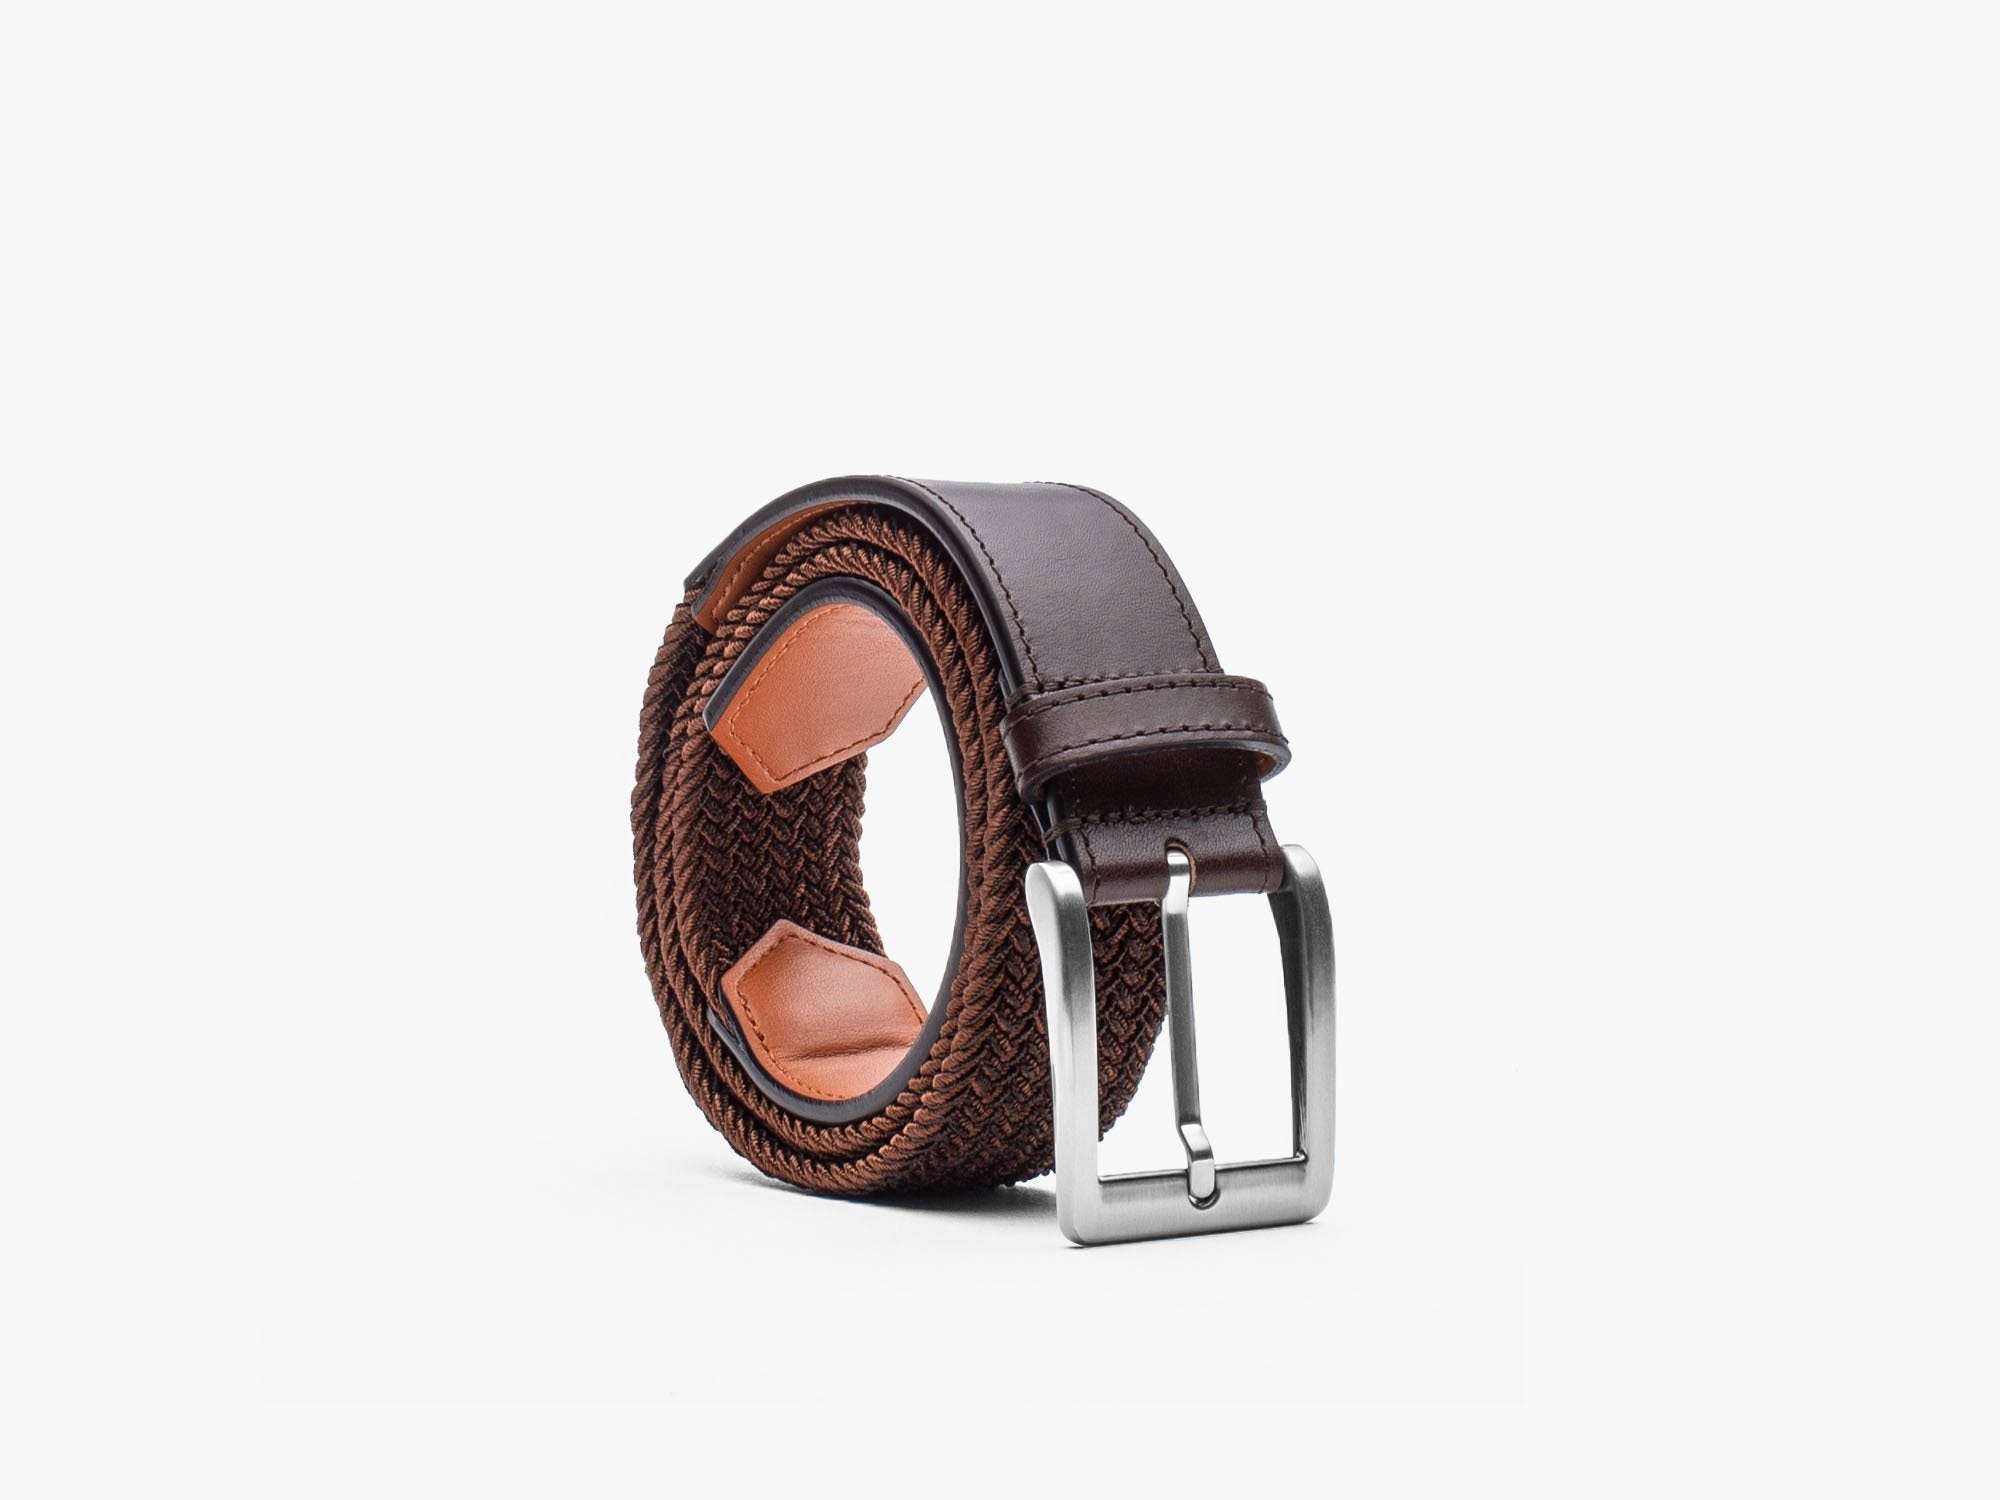 Woodland Blue & Tan Woven Casual Leather Belt for Men